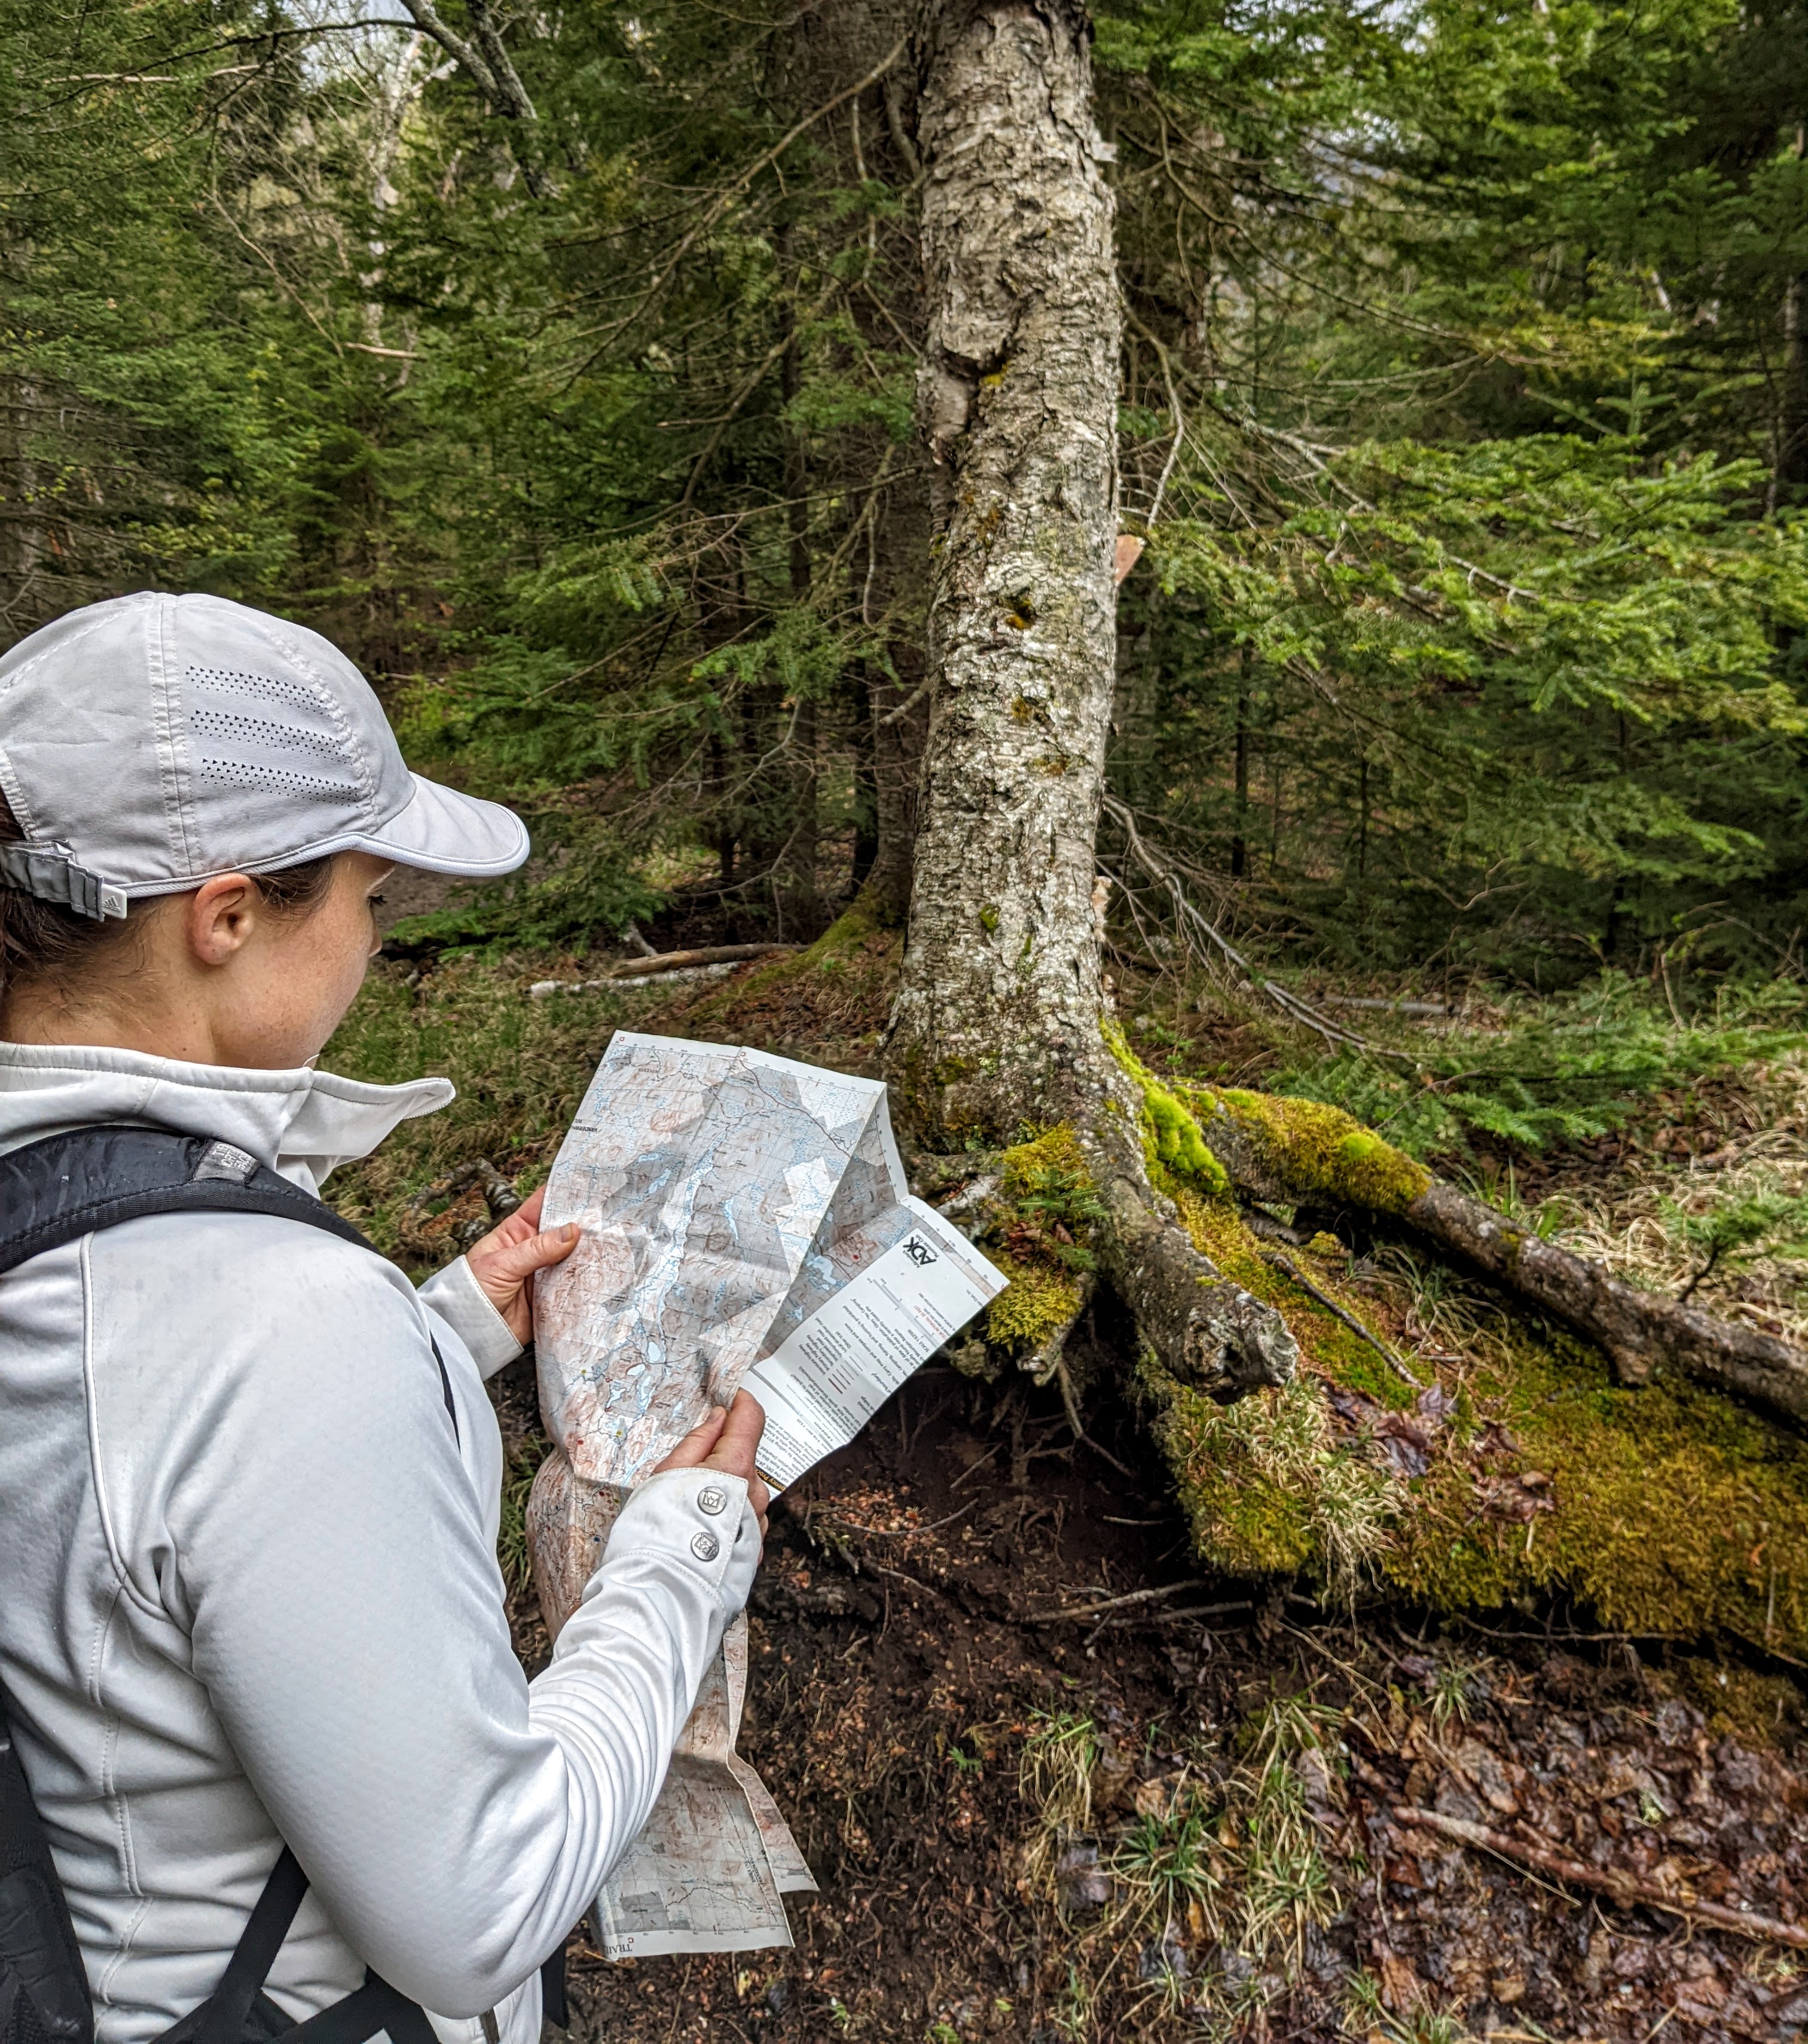 A woman reads a map on a trail.